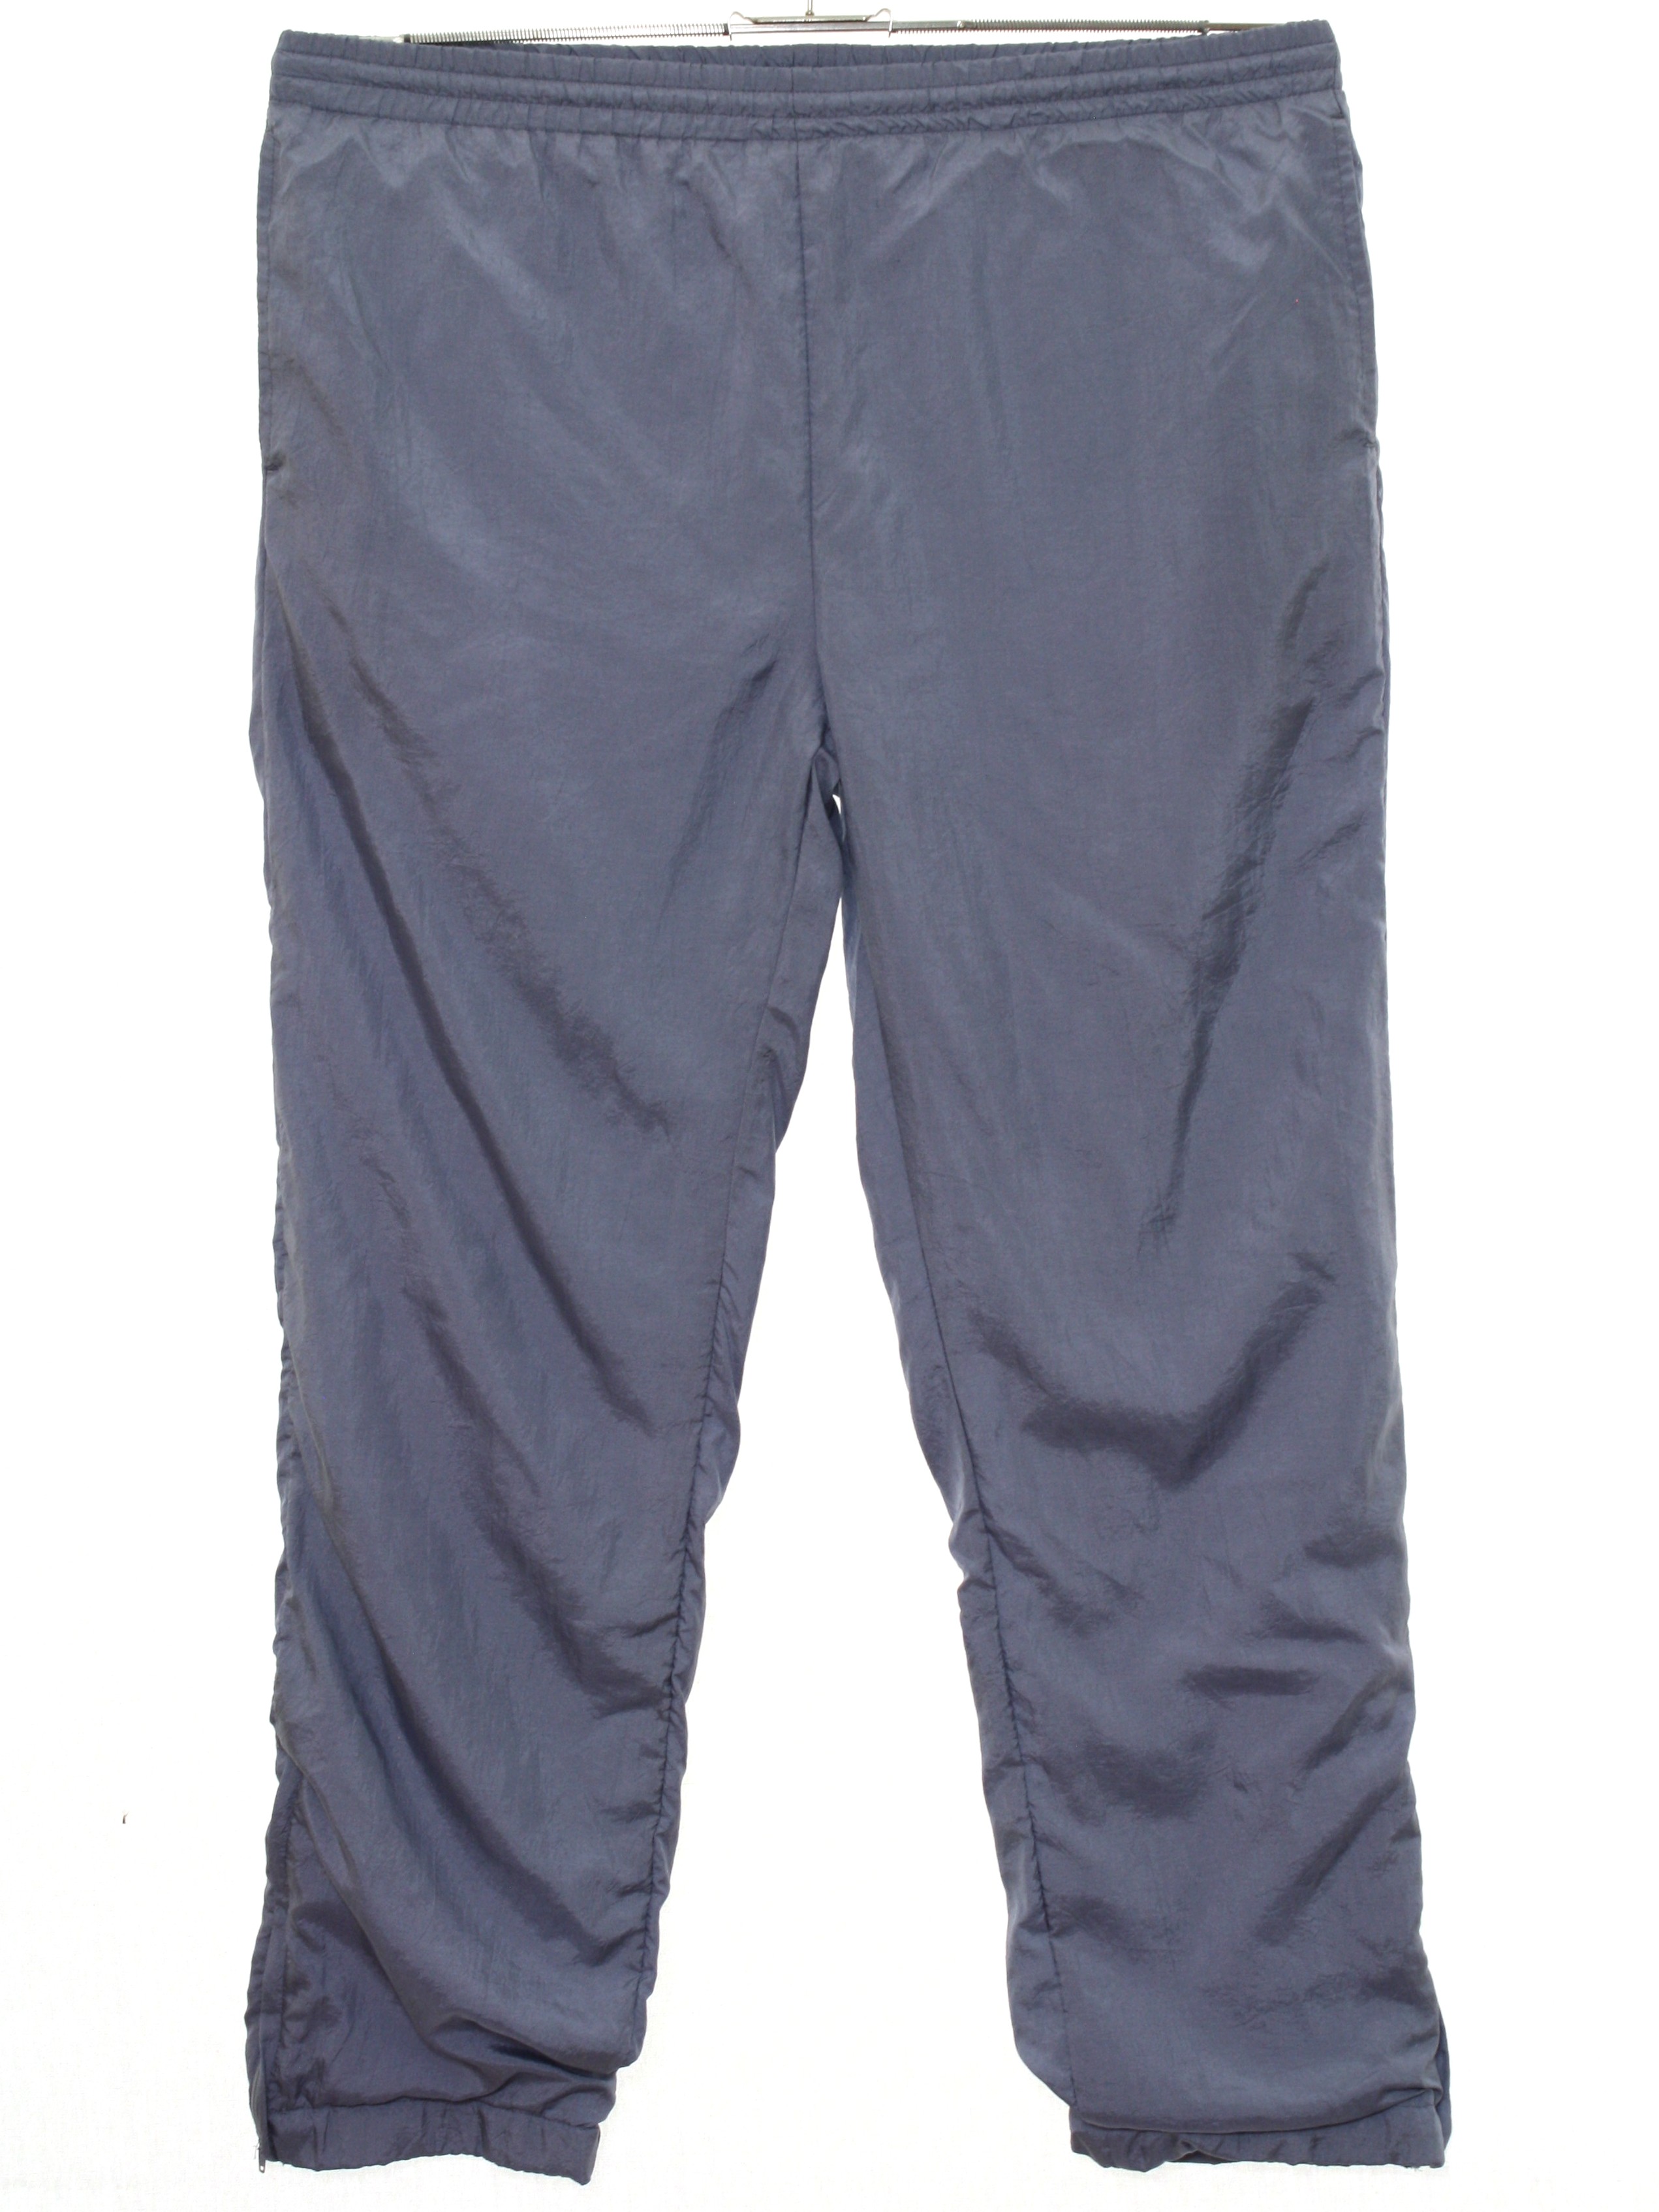 90's Vintage Pants: 90s -Vengo- Mens silver solid colored nylon shell ...